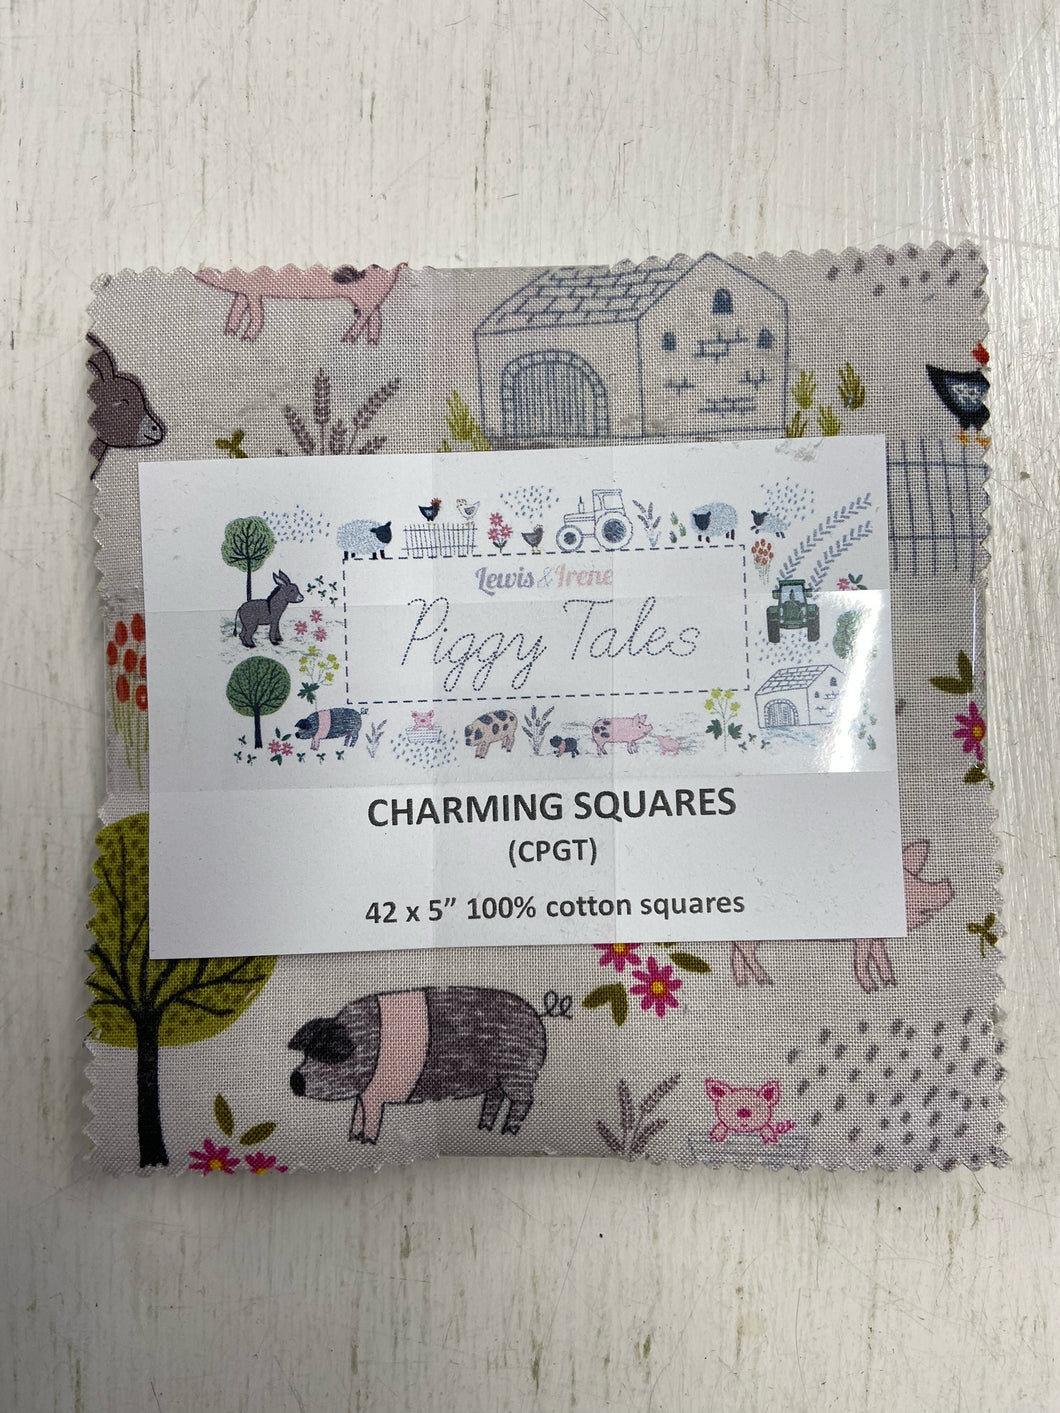 lewis and & irene charming squares charm pack pre-cut five inch squares piggy tales cotton fabric shack malmesbury pig farm donkey